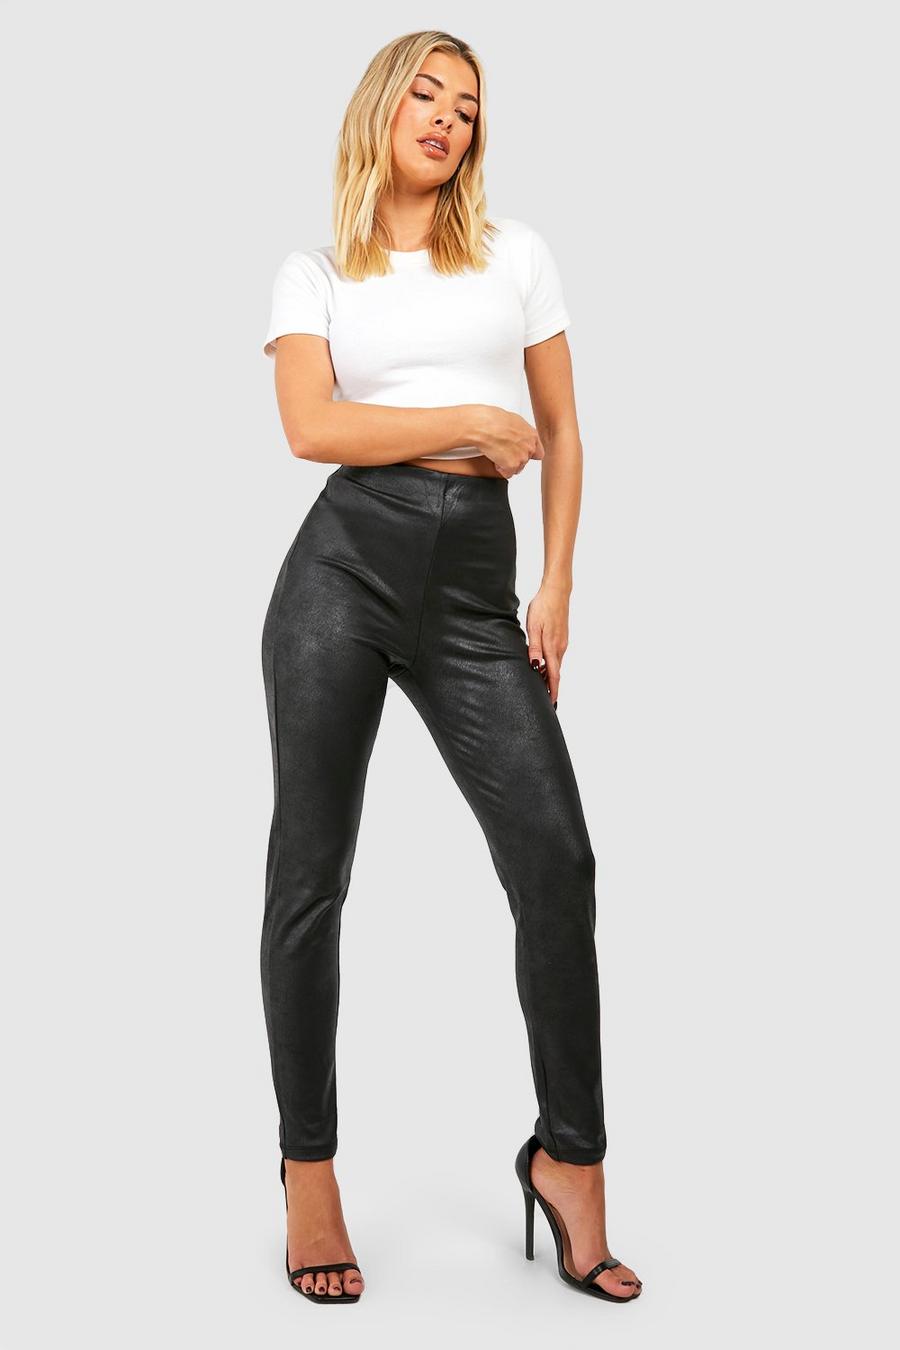 Black Faux Leather High Waisted Legging